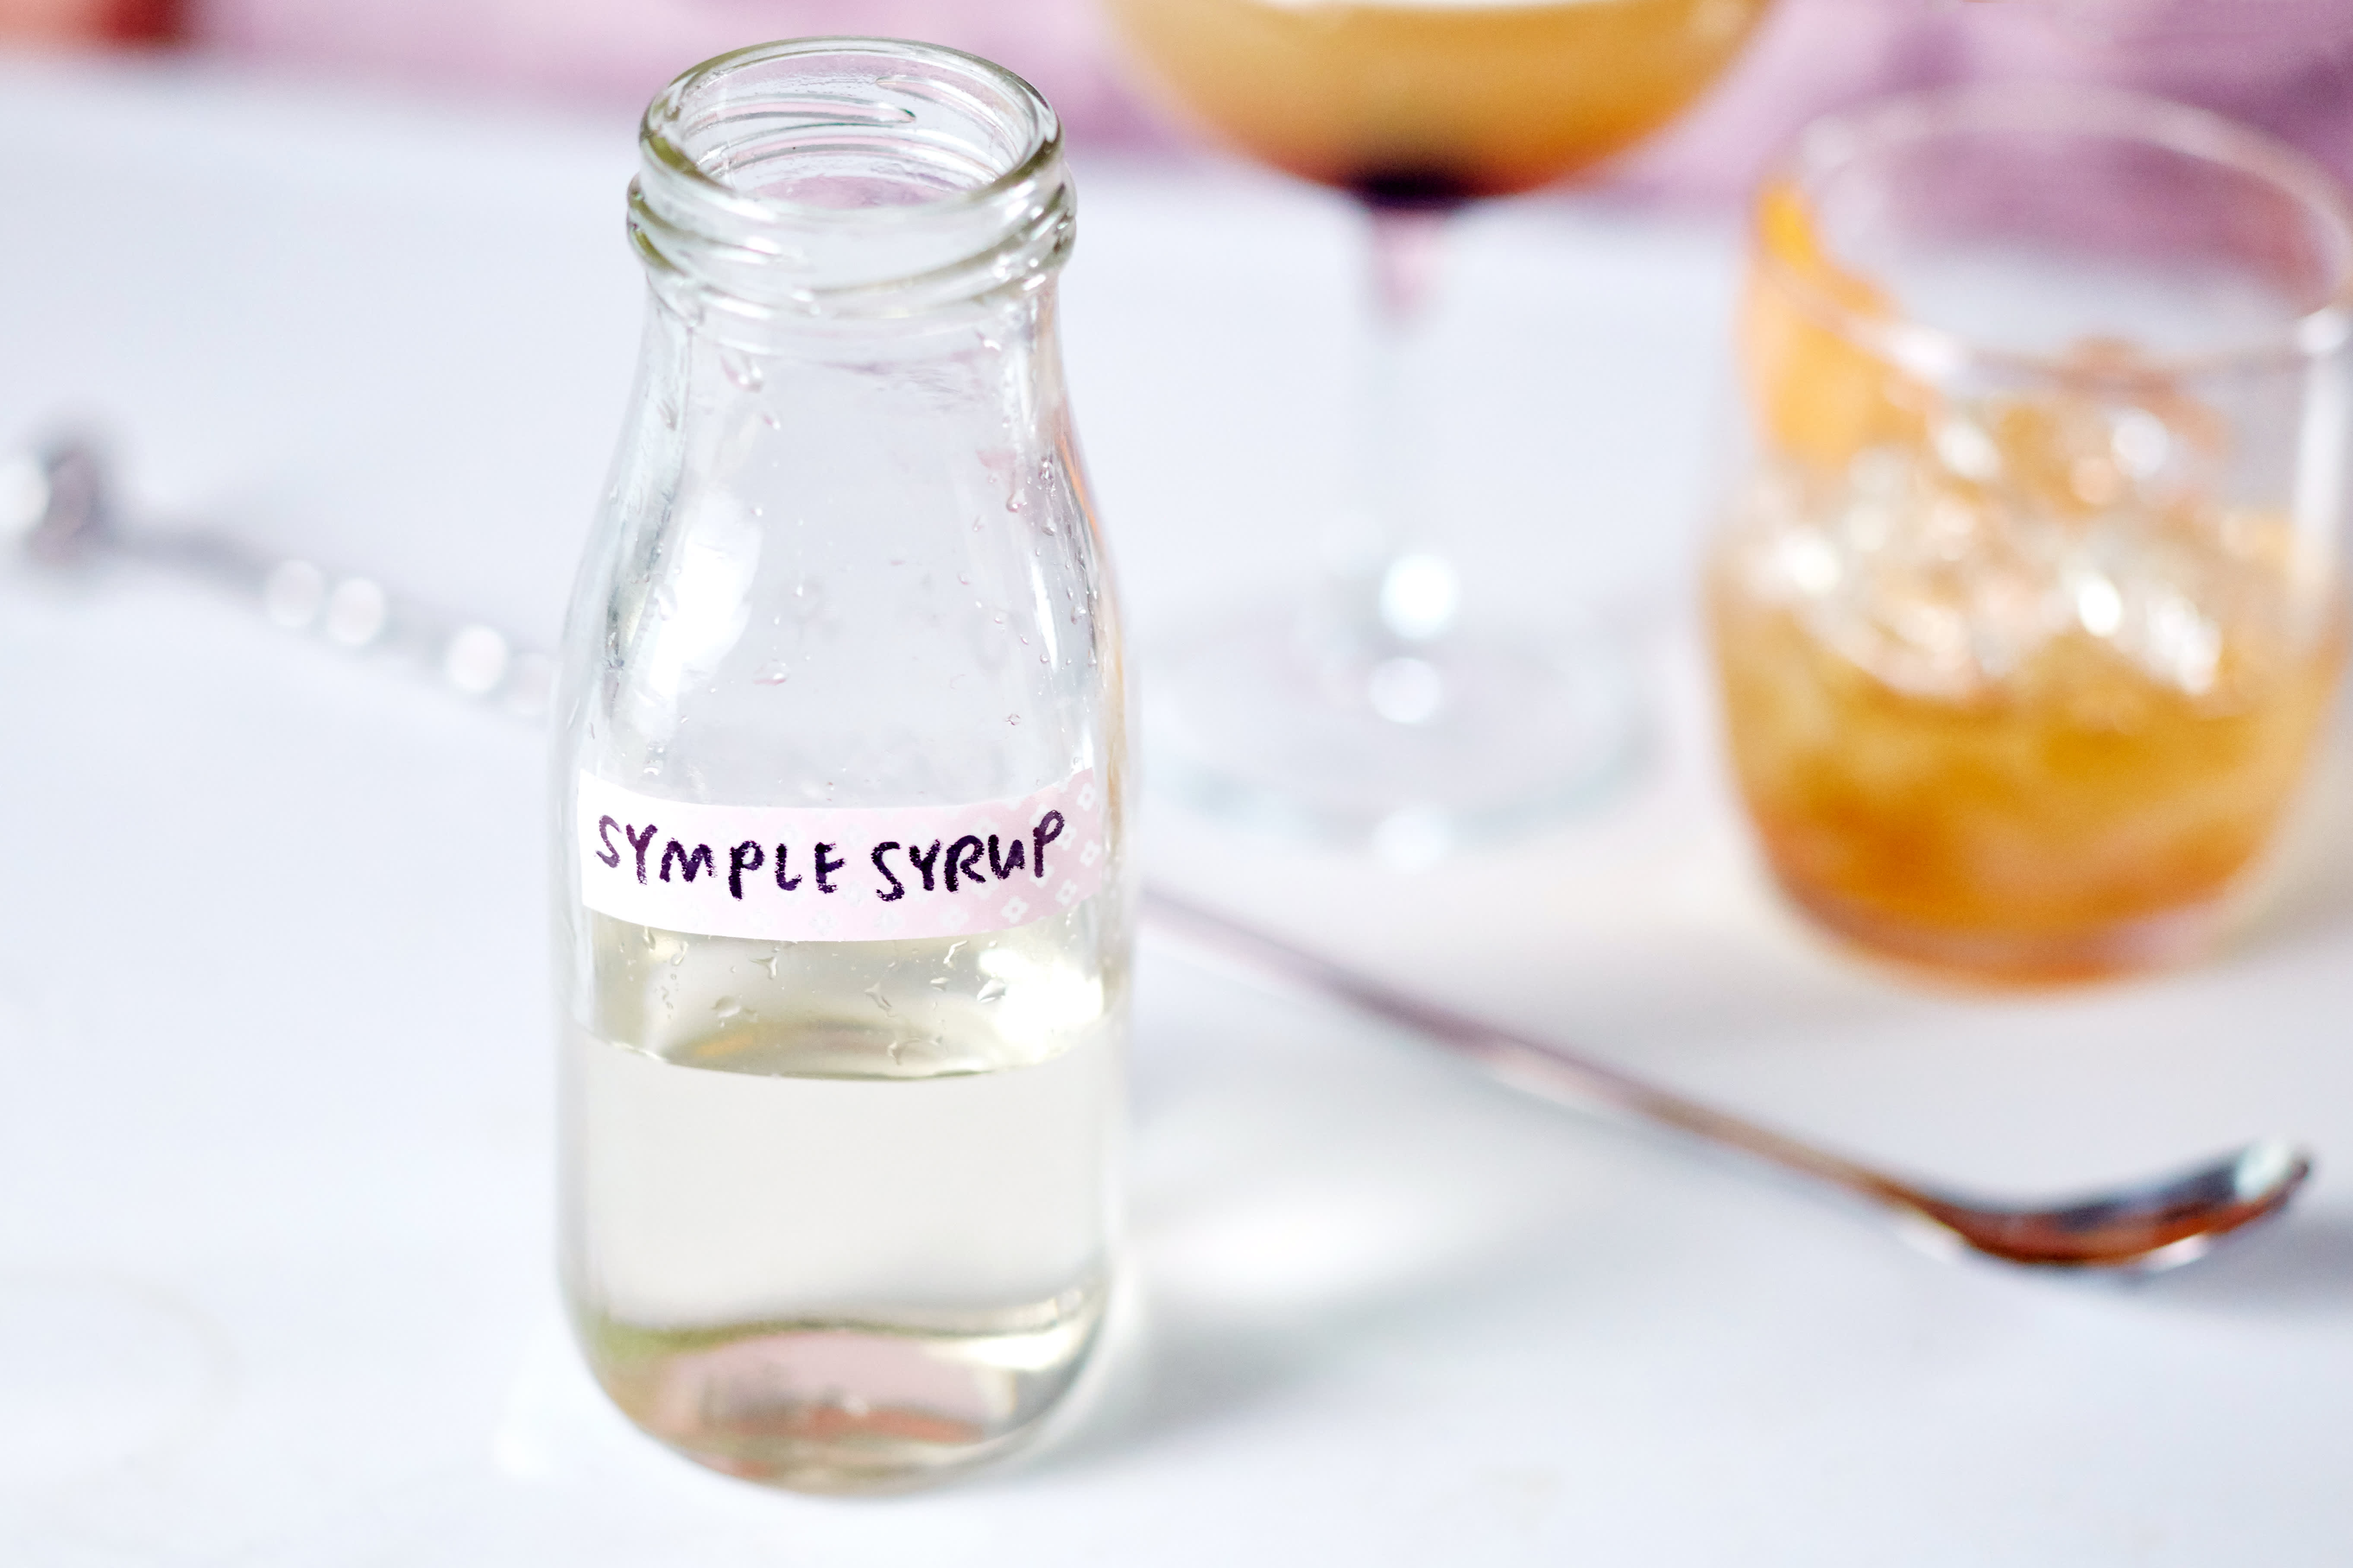 How To Make Simple Syrup